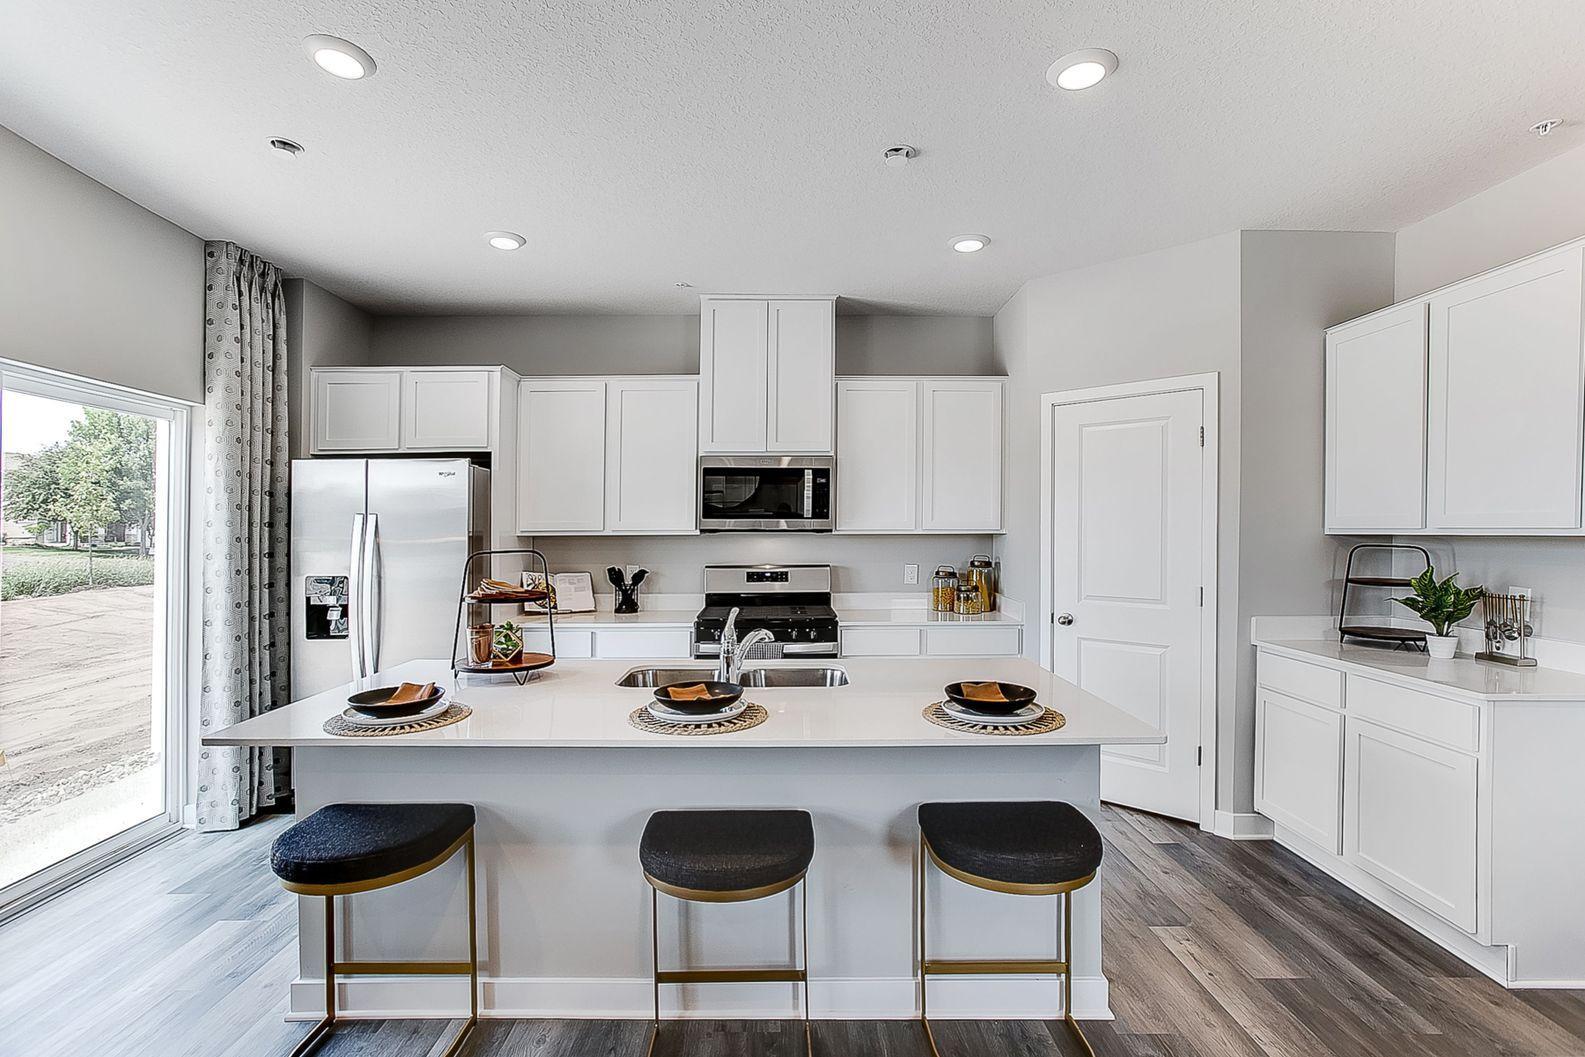 Town home living just got an upgrade with the large island, spacious walk-in pantry and tons of cabinets.